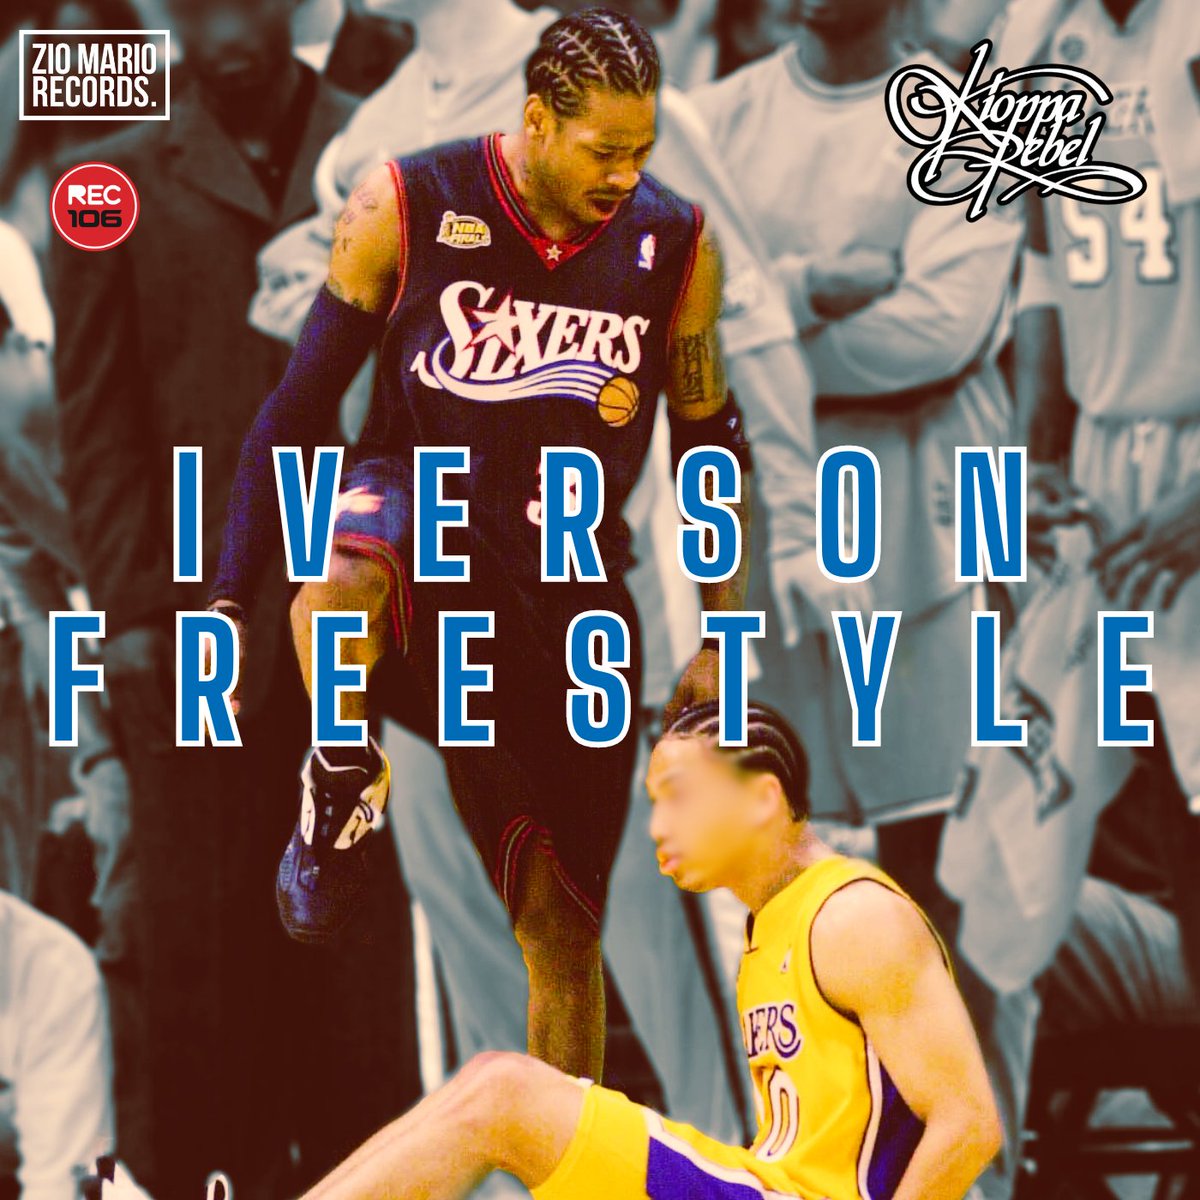 Out Now the cover art of my new single IVERSON FREESTYLE

Stay tuned for the date of release 🔜

#iversonfreestyle #kiopparebel #nftmusic #rapitaliano #hiphopitaliano #staytuned #outsoon